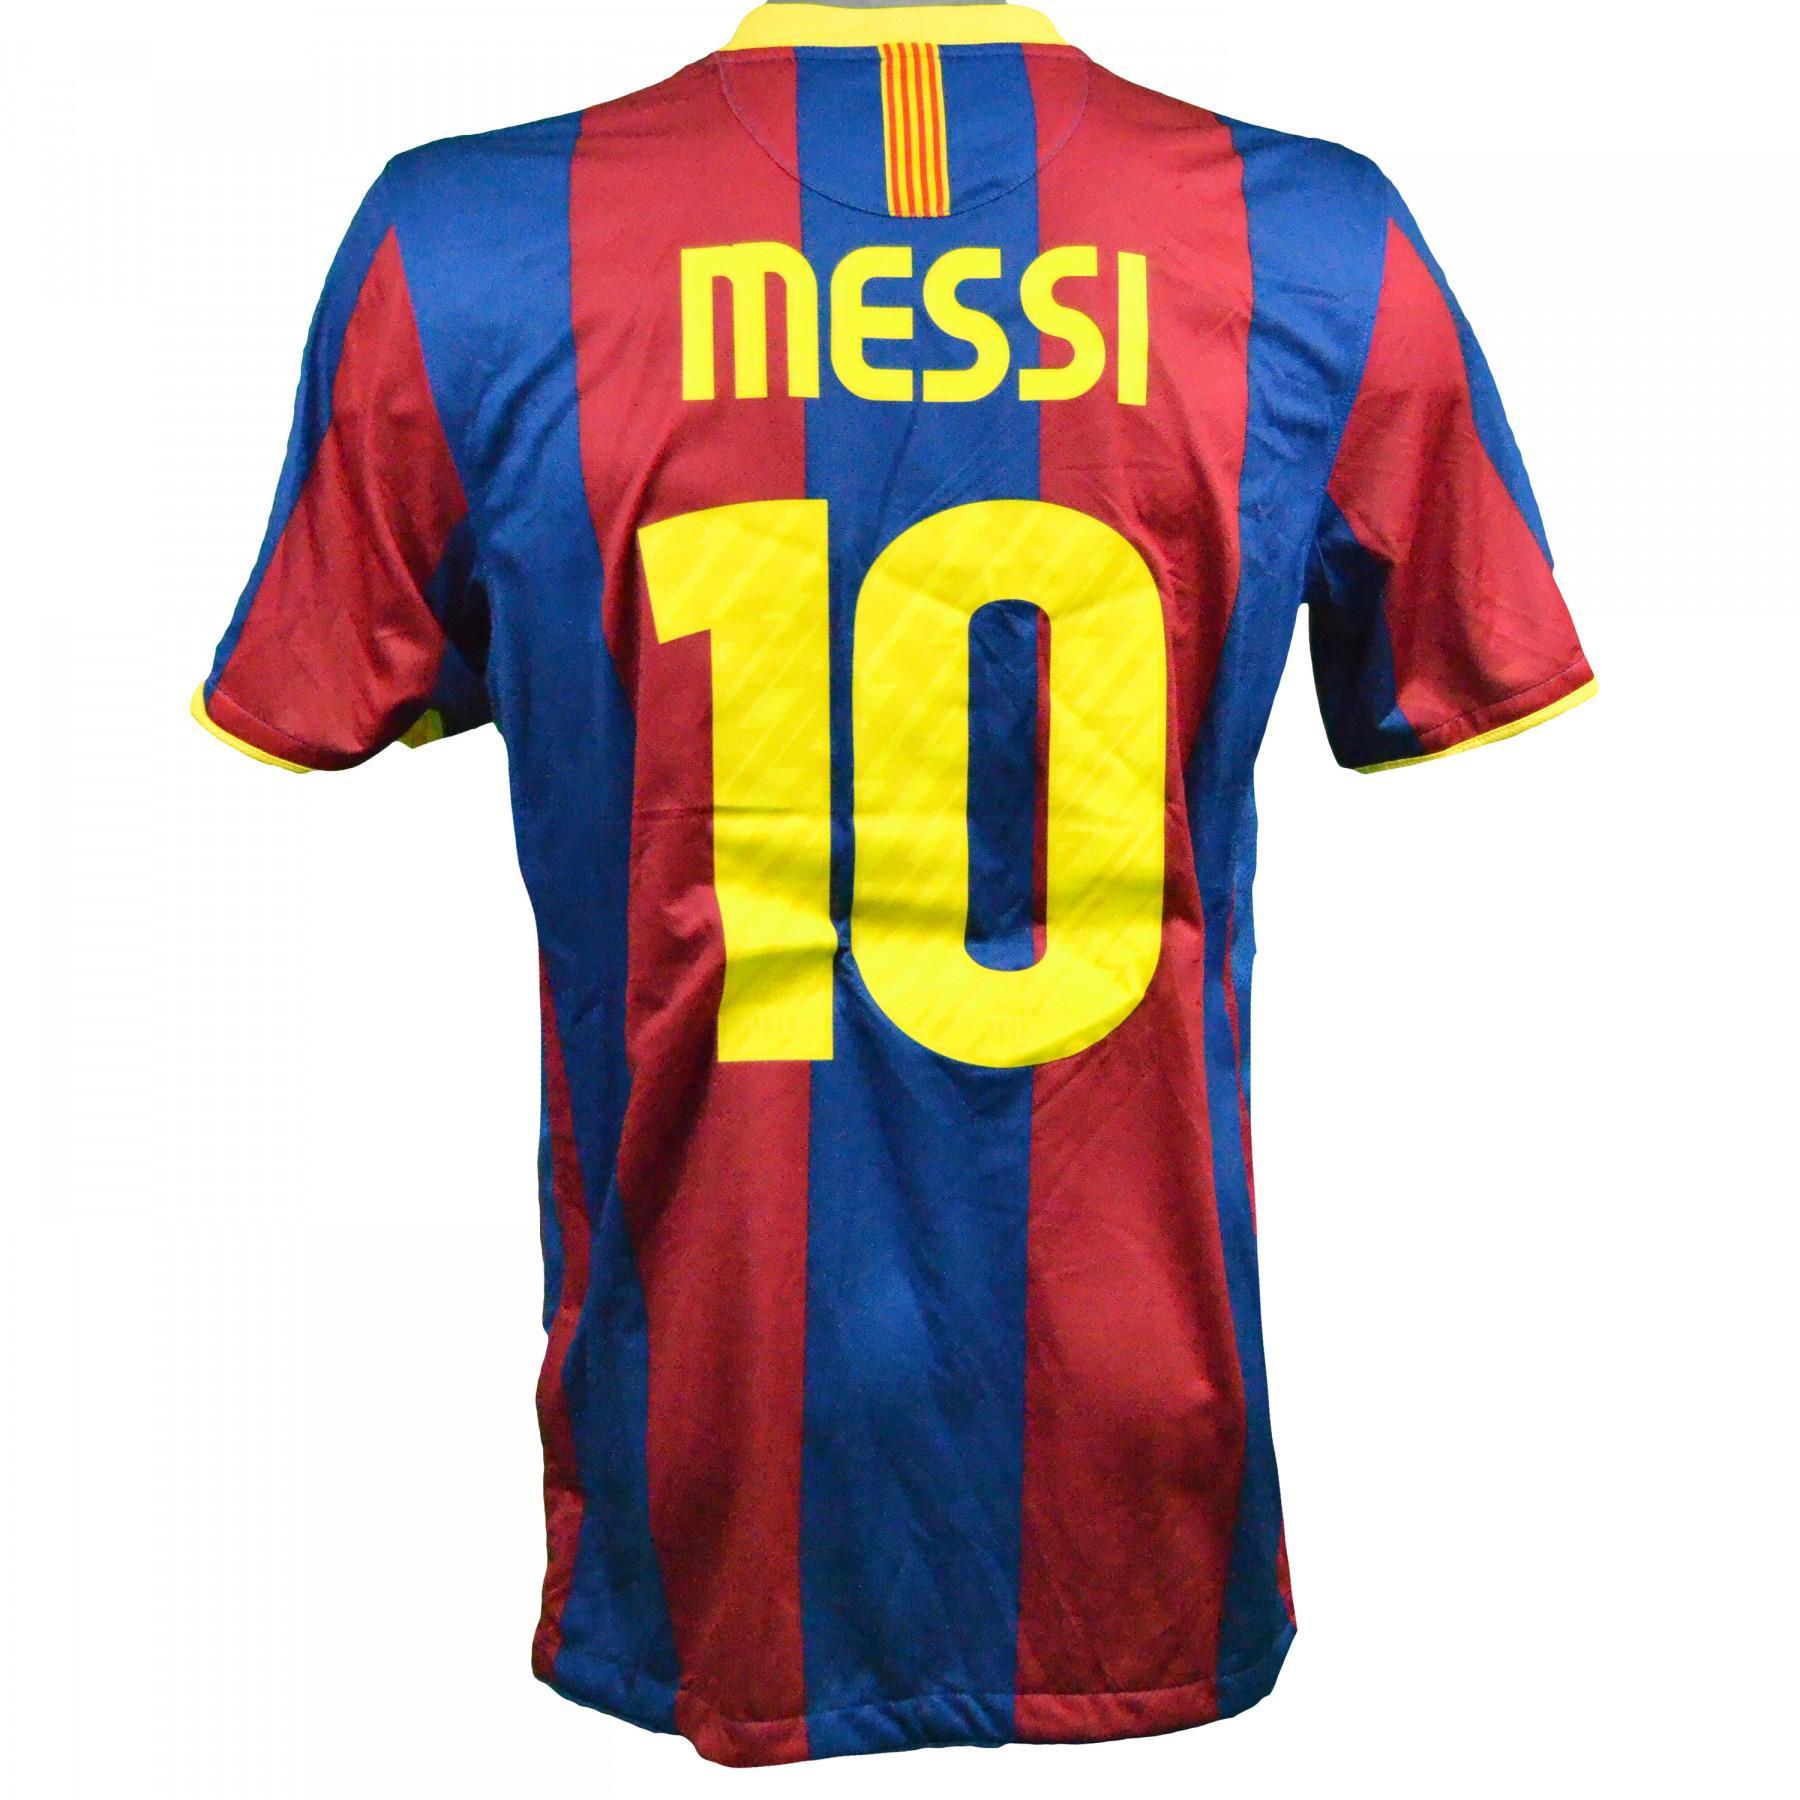 Messi#10 Retro Jersey 2010-2011 Blue&RED Color 